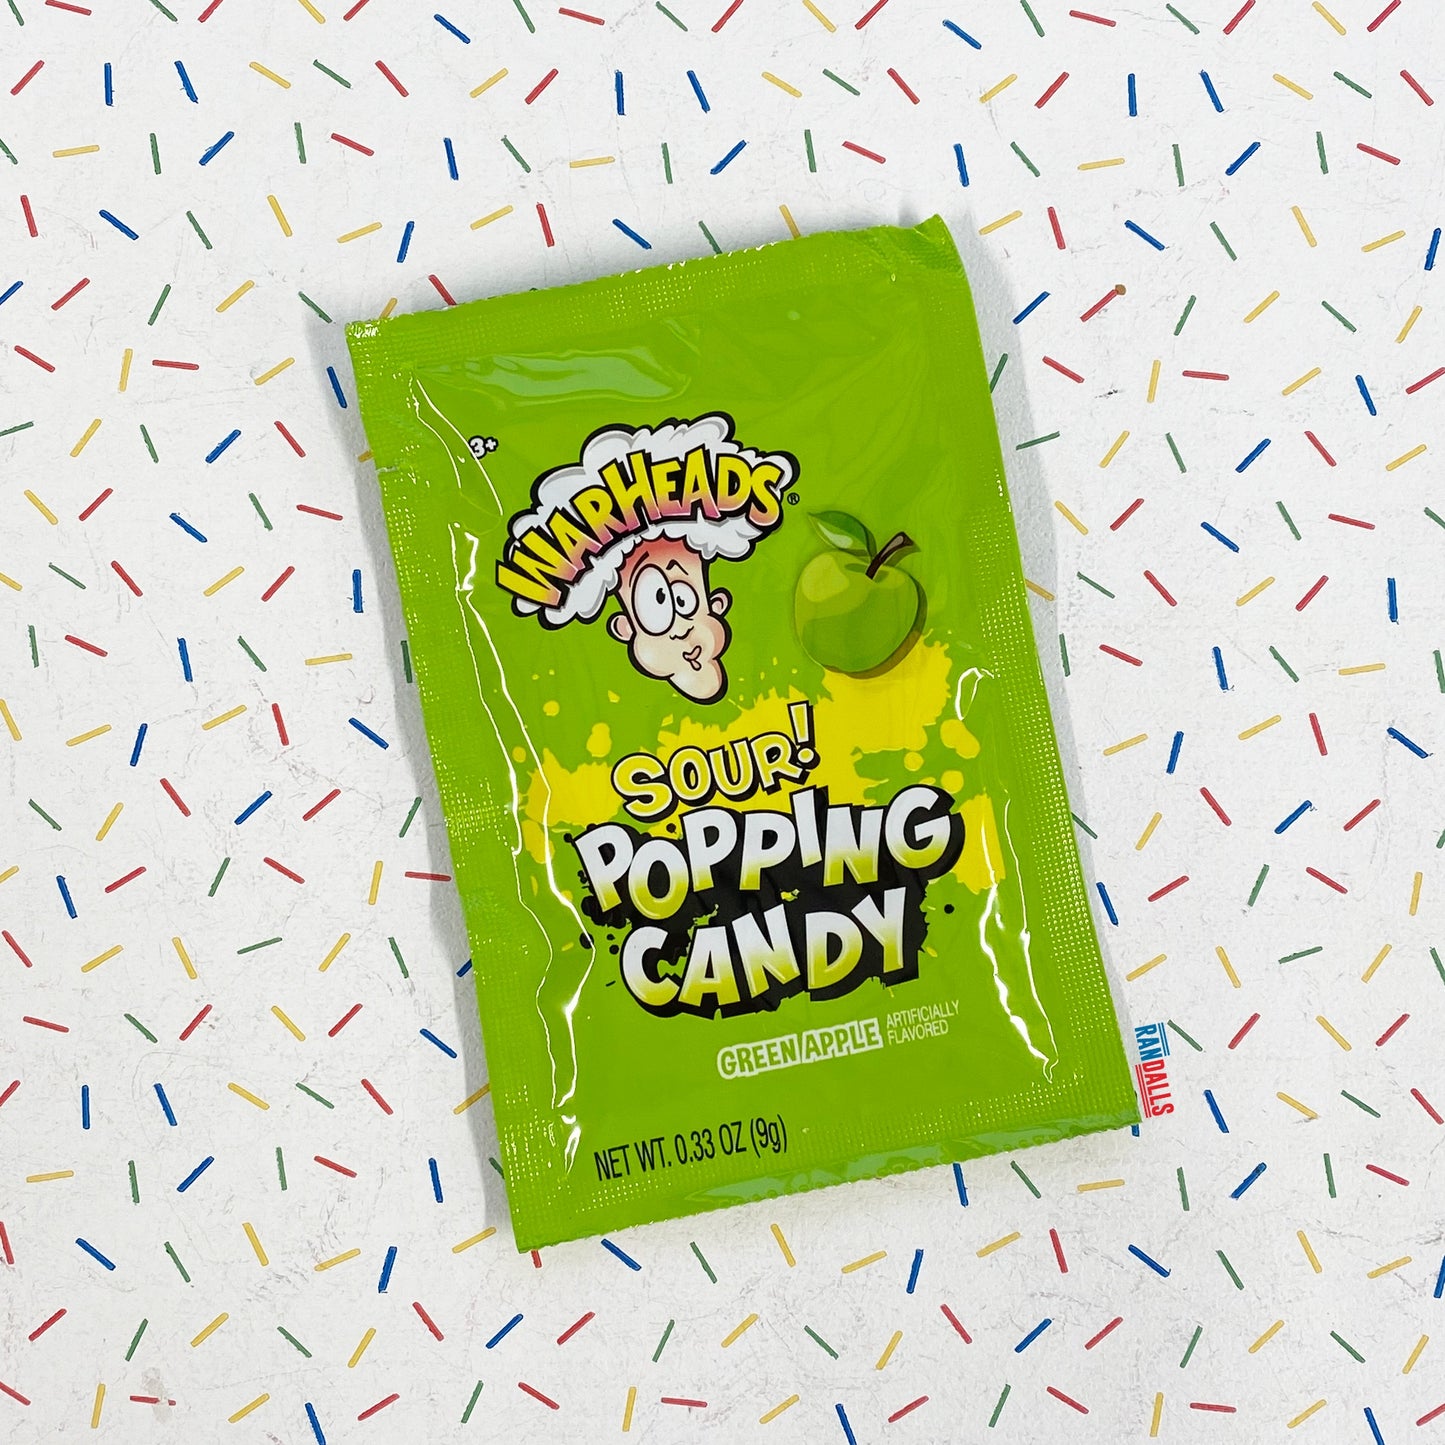 warheads sour popping candy green apple, pop rocks, sweets, crackling